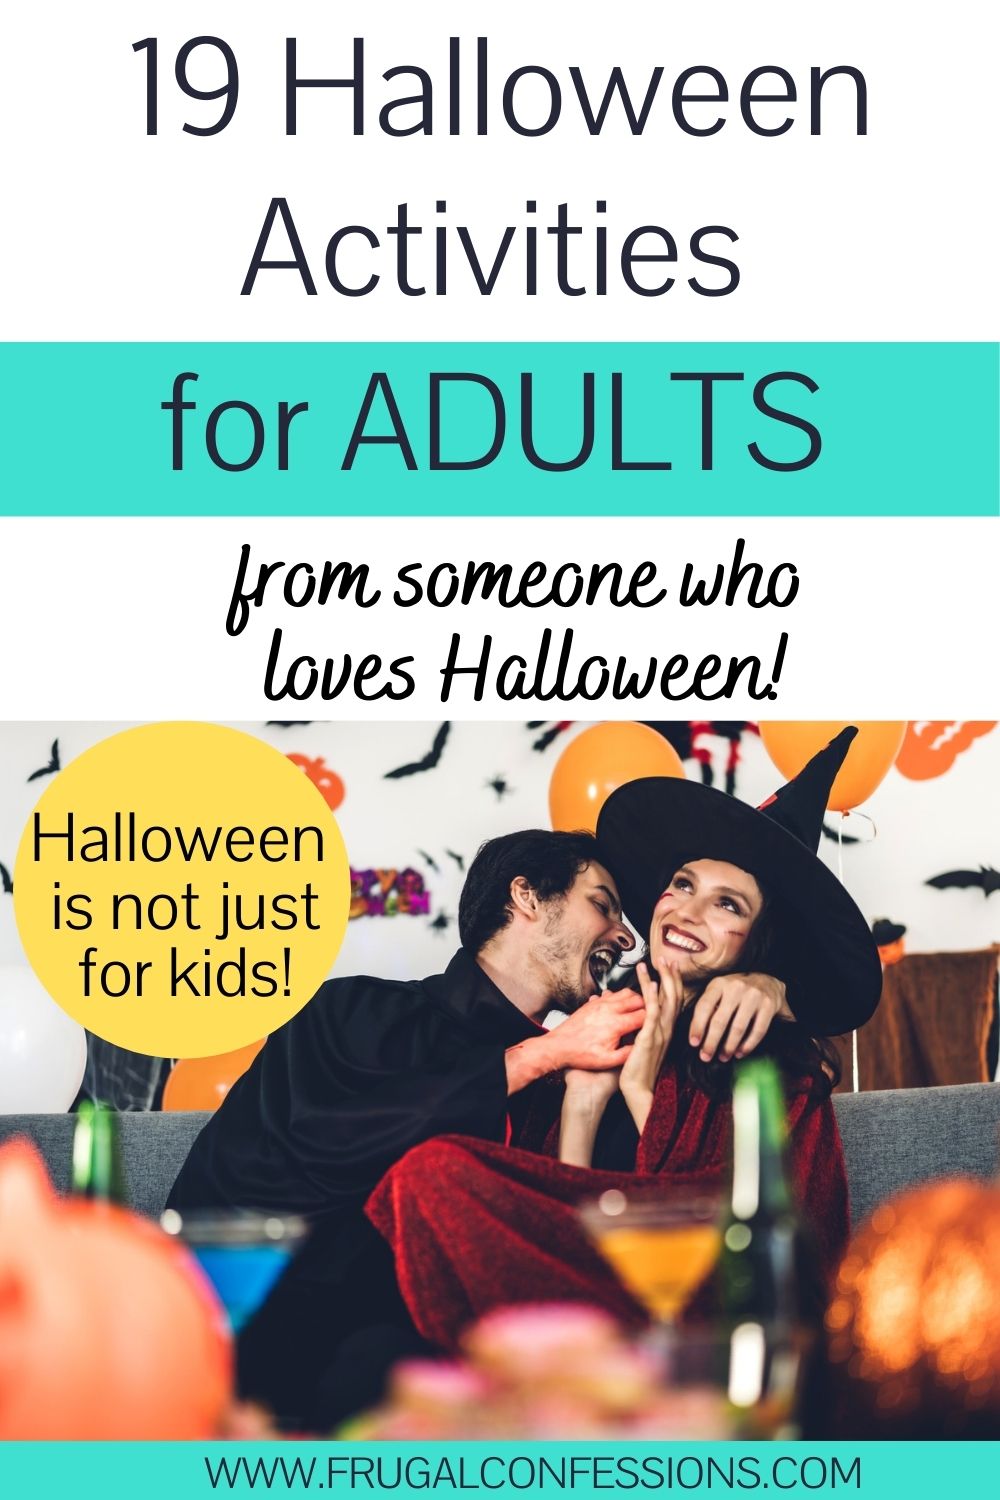 adult couple on couch giggling, in costumes, text overlay "19 Halloween activities for adults - from someone who loves Halloween"